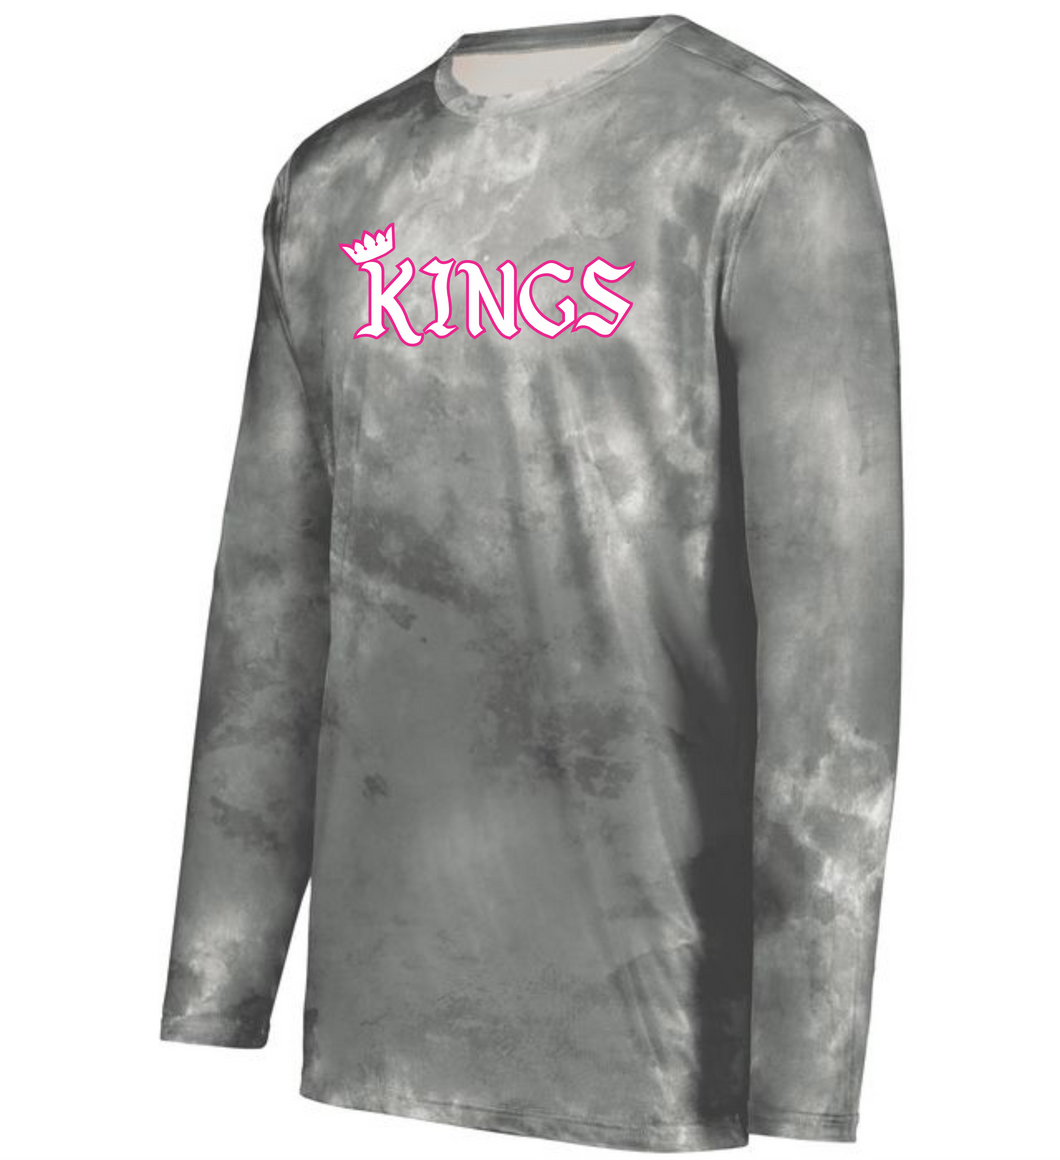 ATL-KINGS-633-2 - Holloway Cotton-Touch Poly Cloud Long Sleeve Tee - KINGS Logo